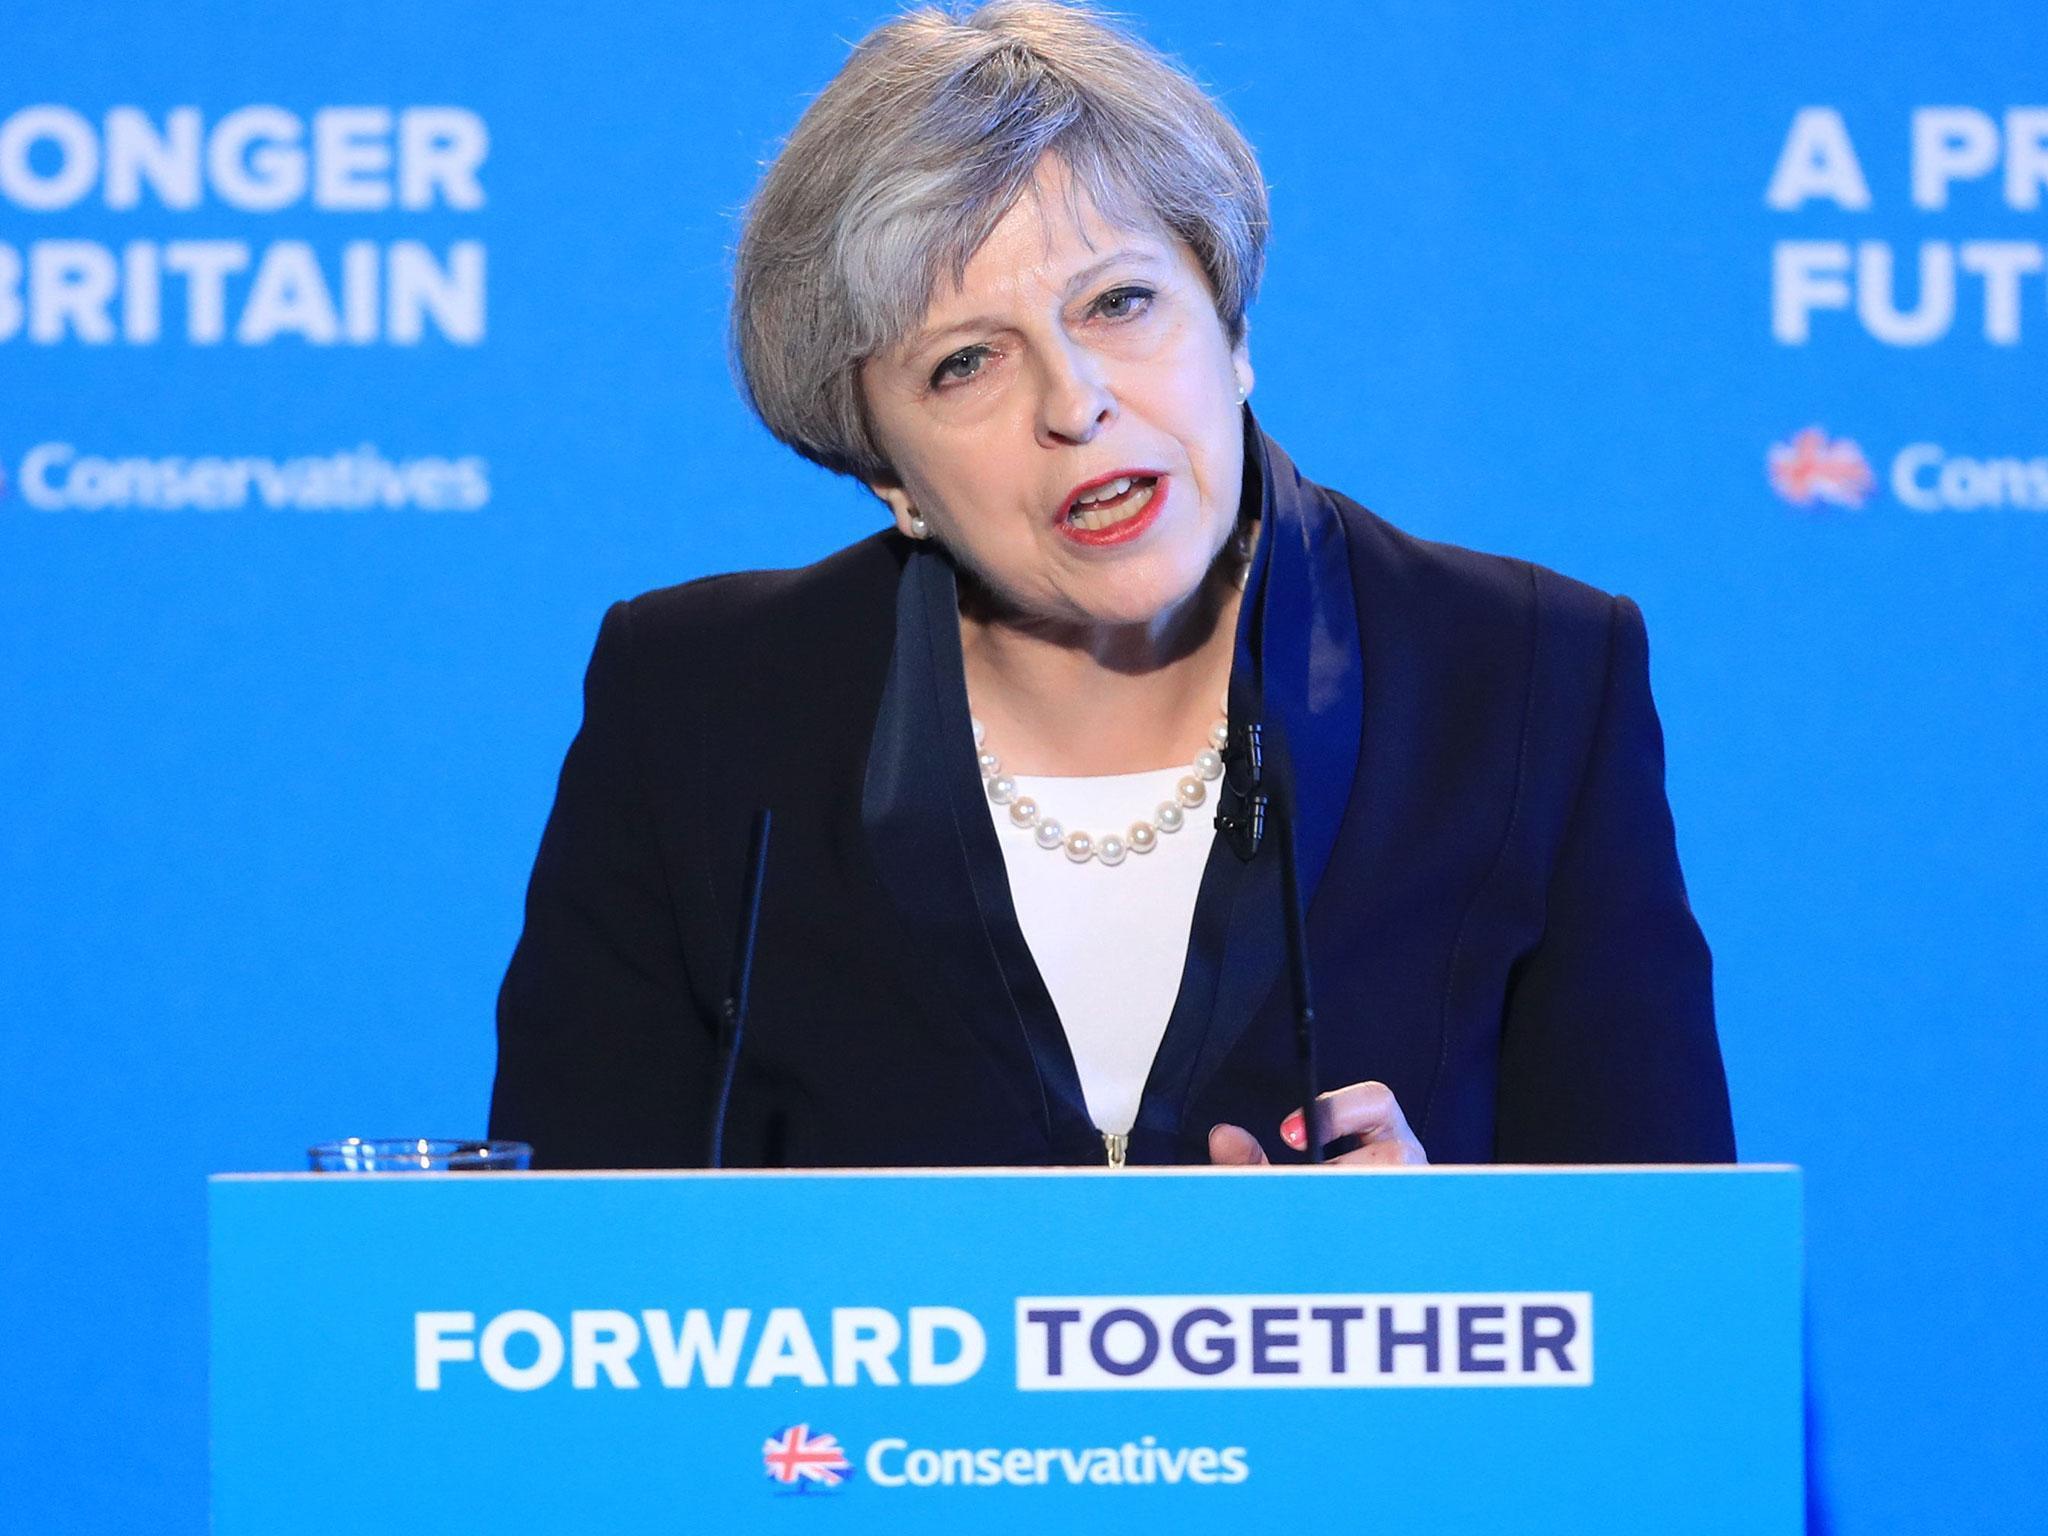 Theresa May delivered her manifesto speech, which turns its back on traditional older voters